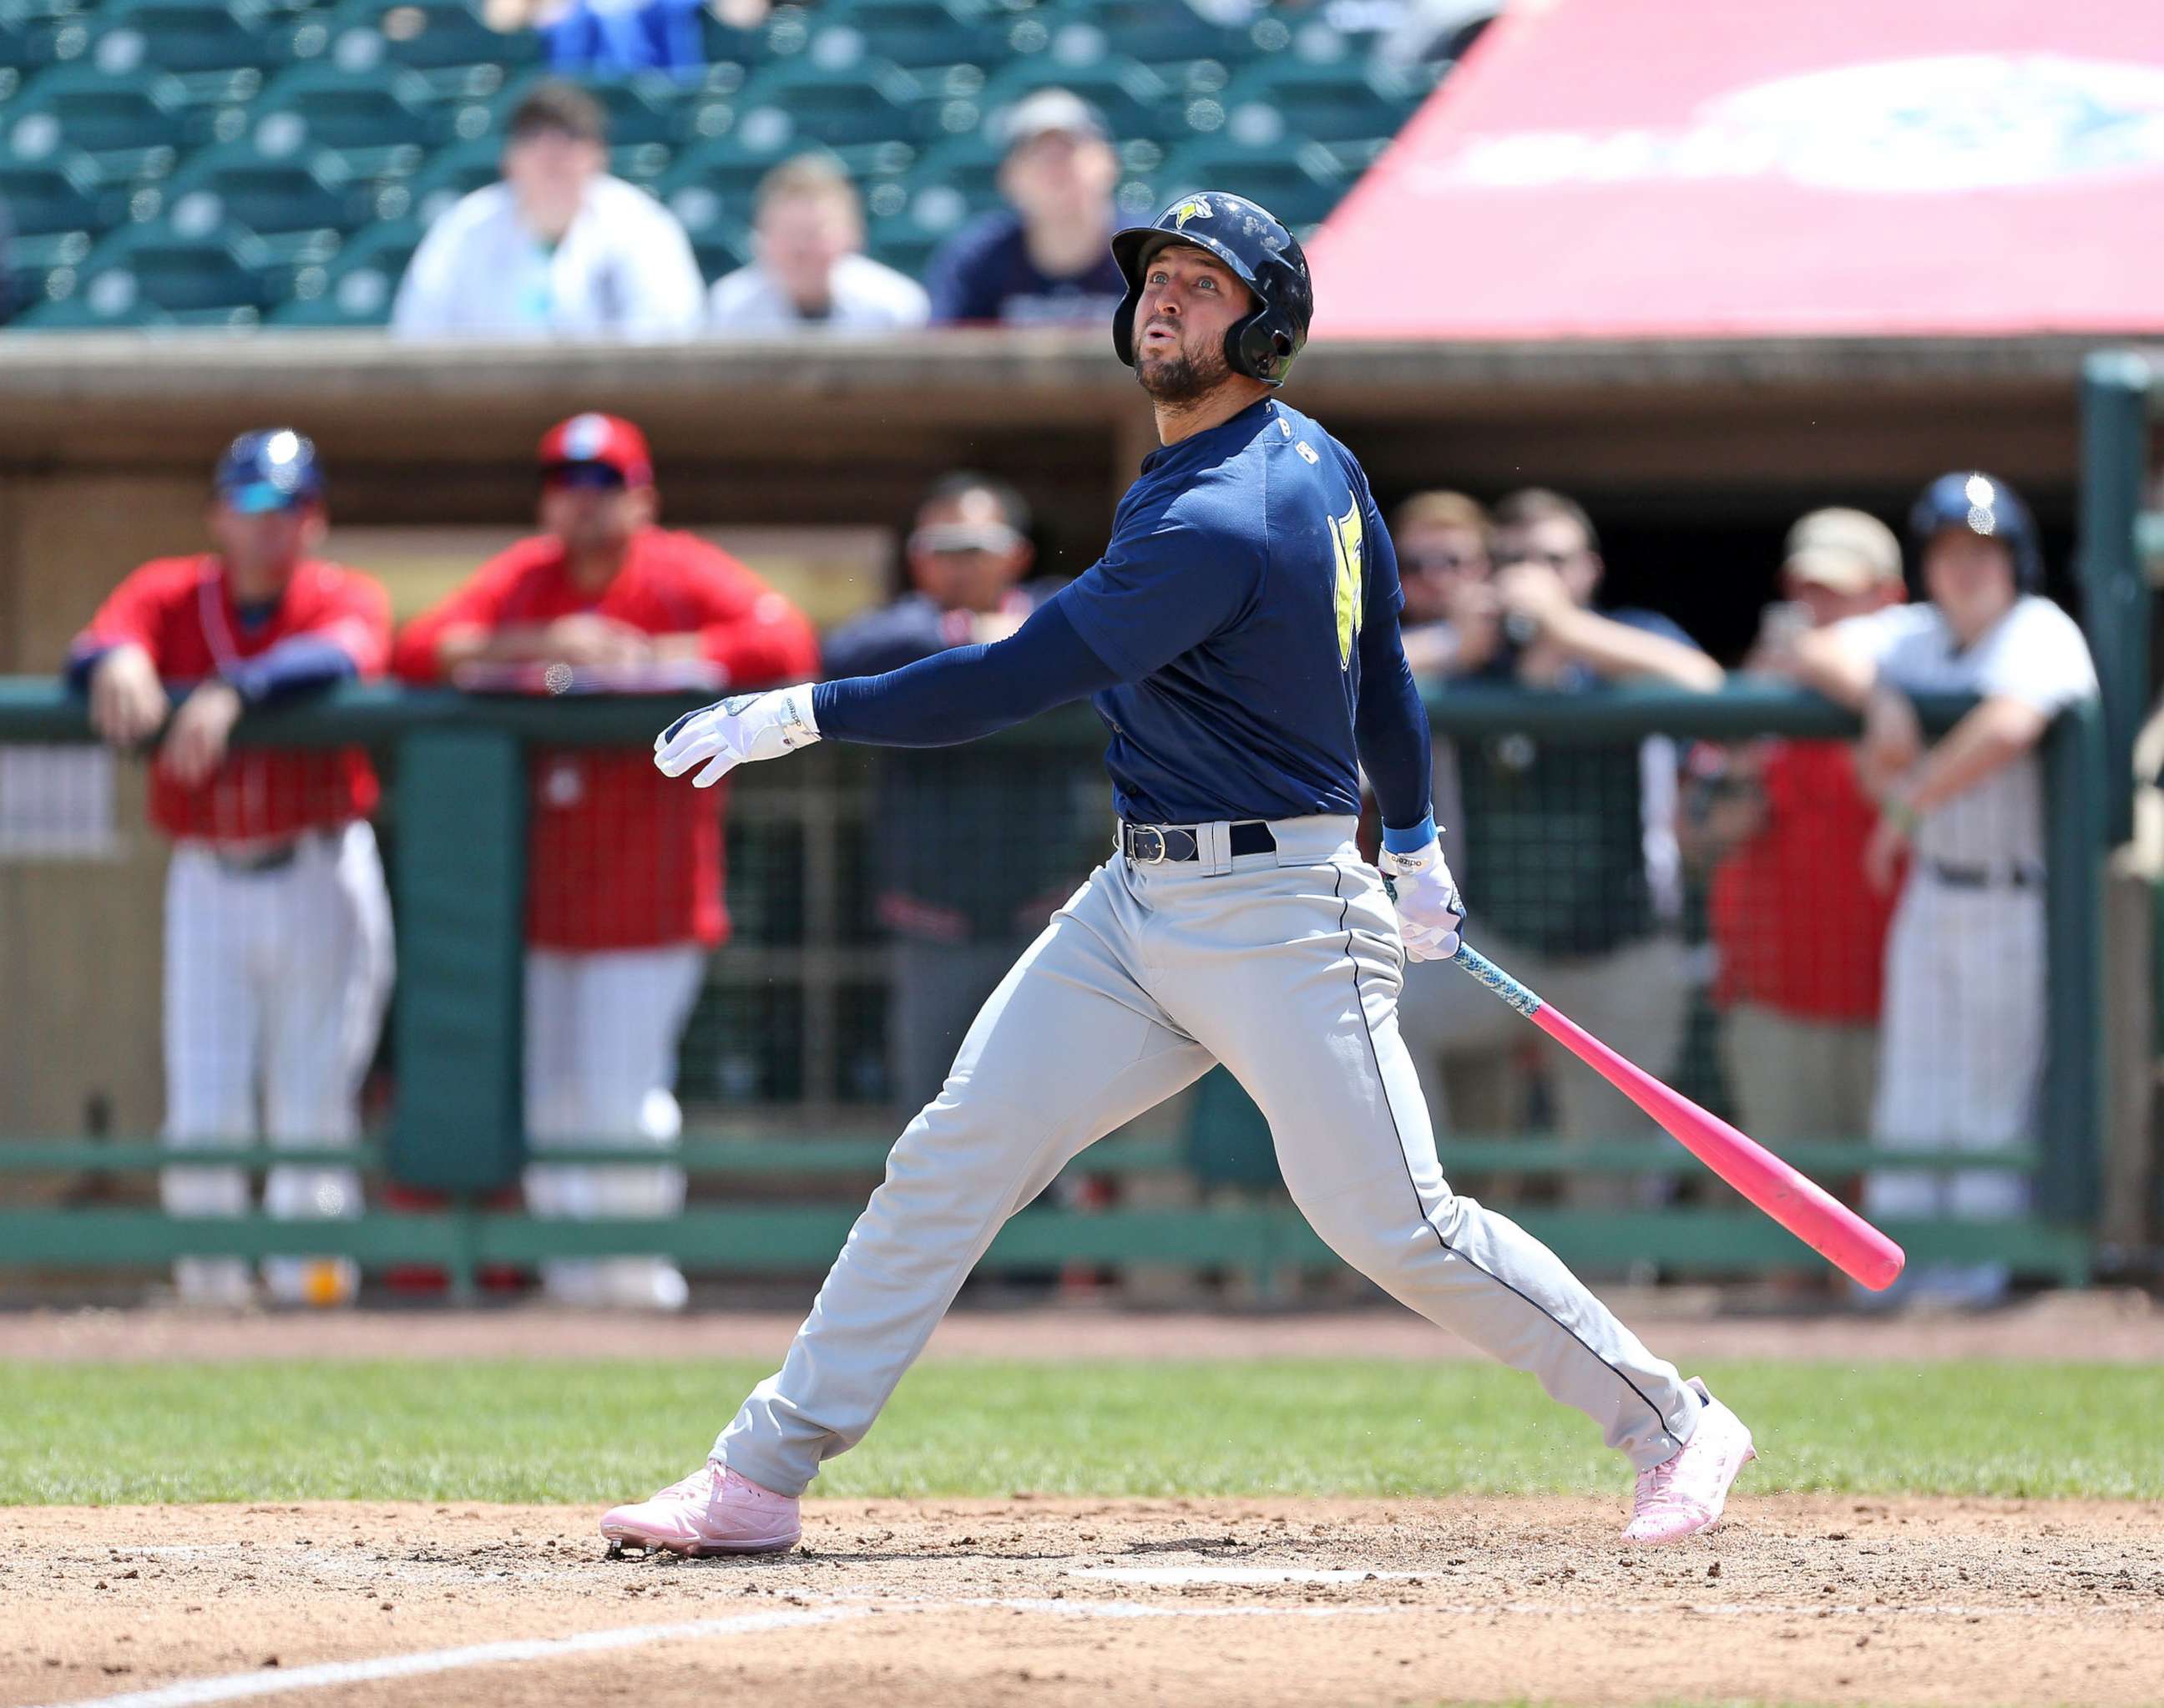 PHOTO: Tim Tebow #15 of the Columbia Fireflies fouls off a pitch while batting against the Lakewood BlueClaws, May 14, 2017, at FirstEnergy Park in Lakewood, New Jersey.